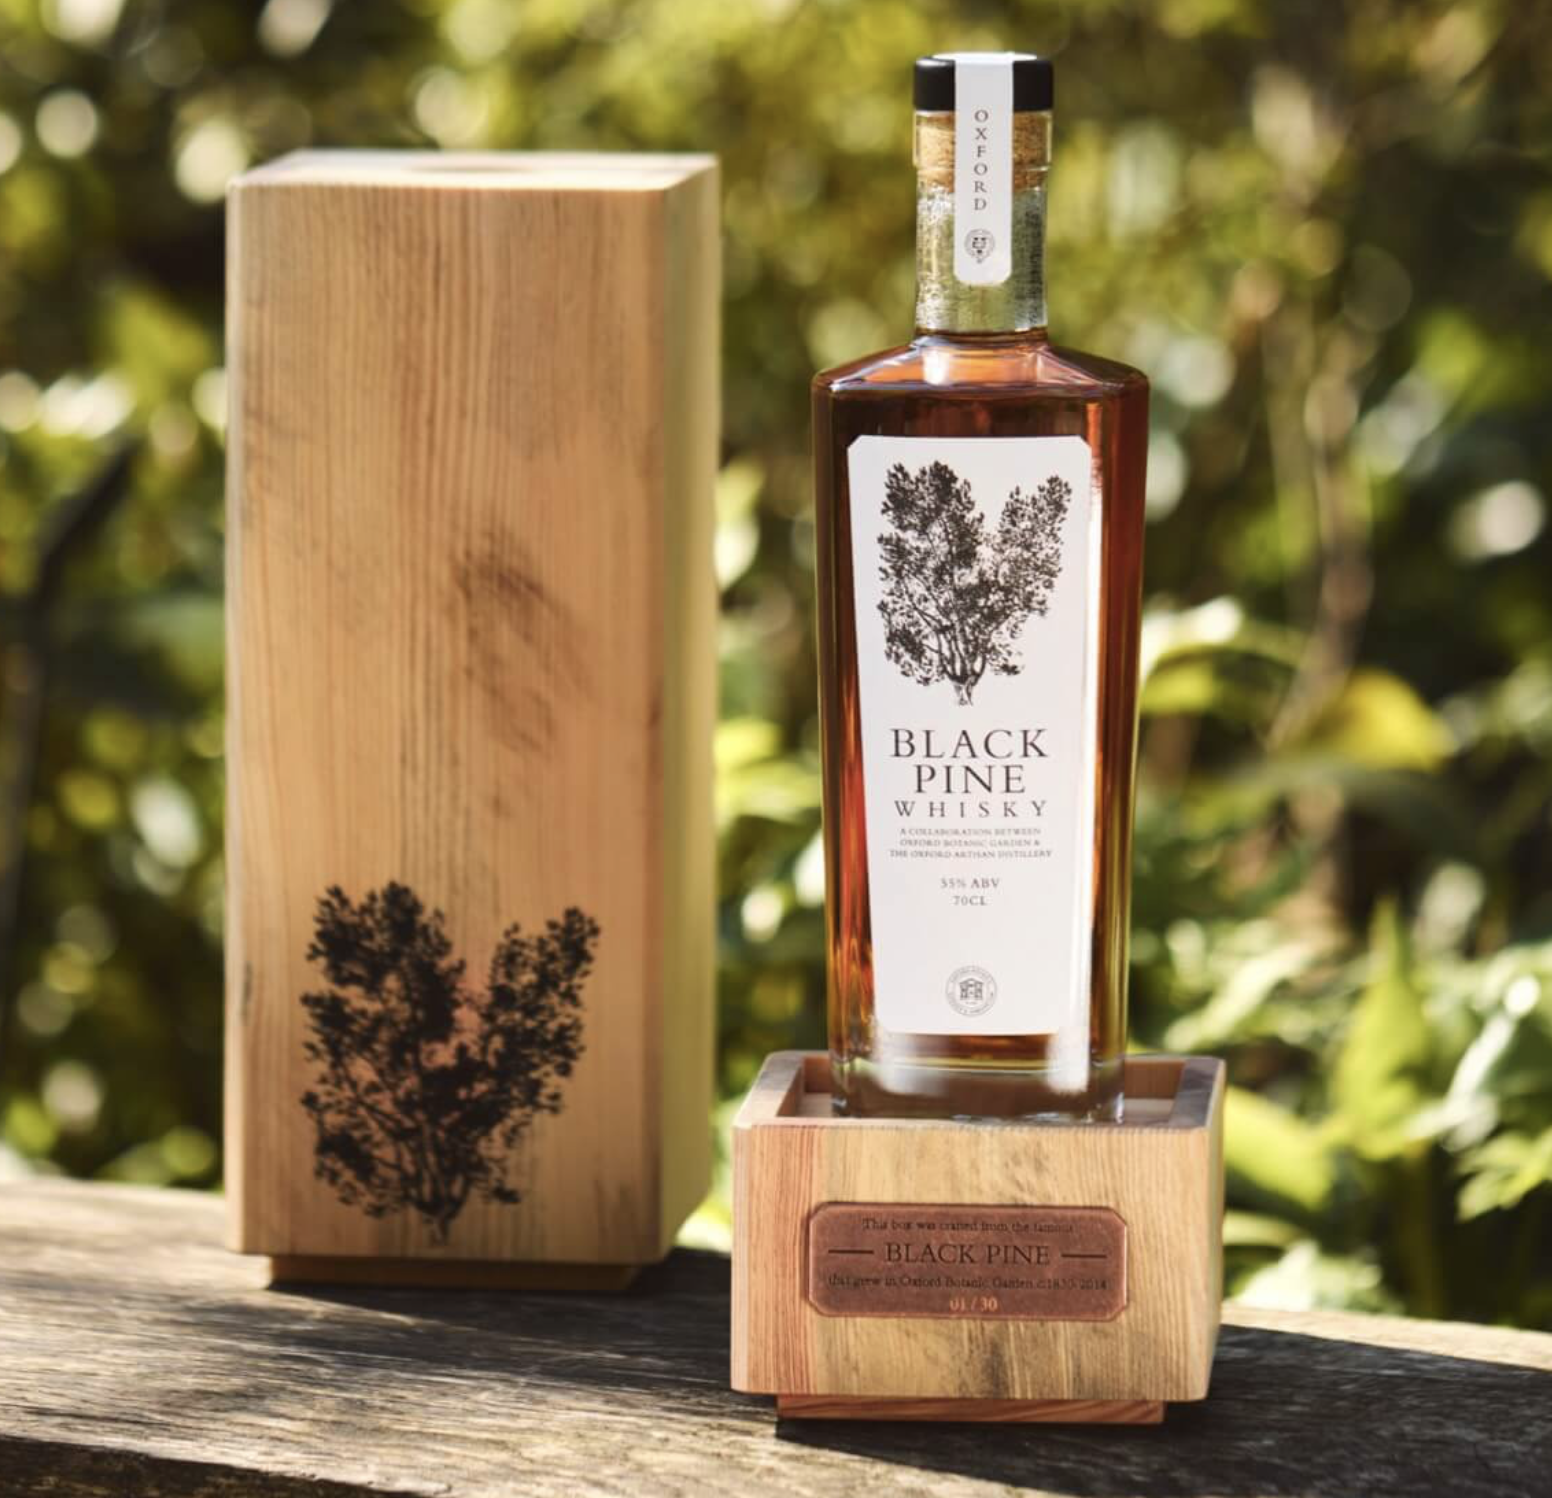 The Oxford Artisan Distillery is set to launch a limited edition whisky – Black Pine Whisky - coinciding with Hobbit Day on September 22, 2023.